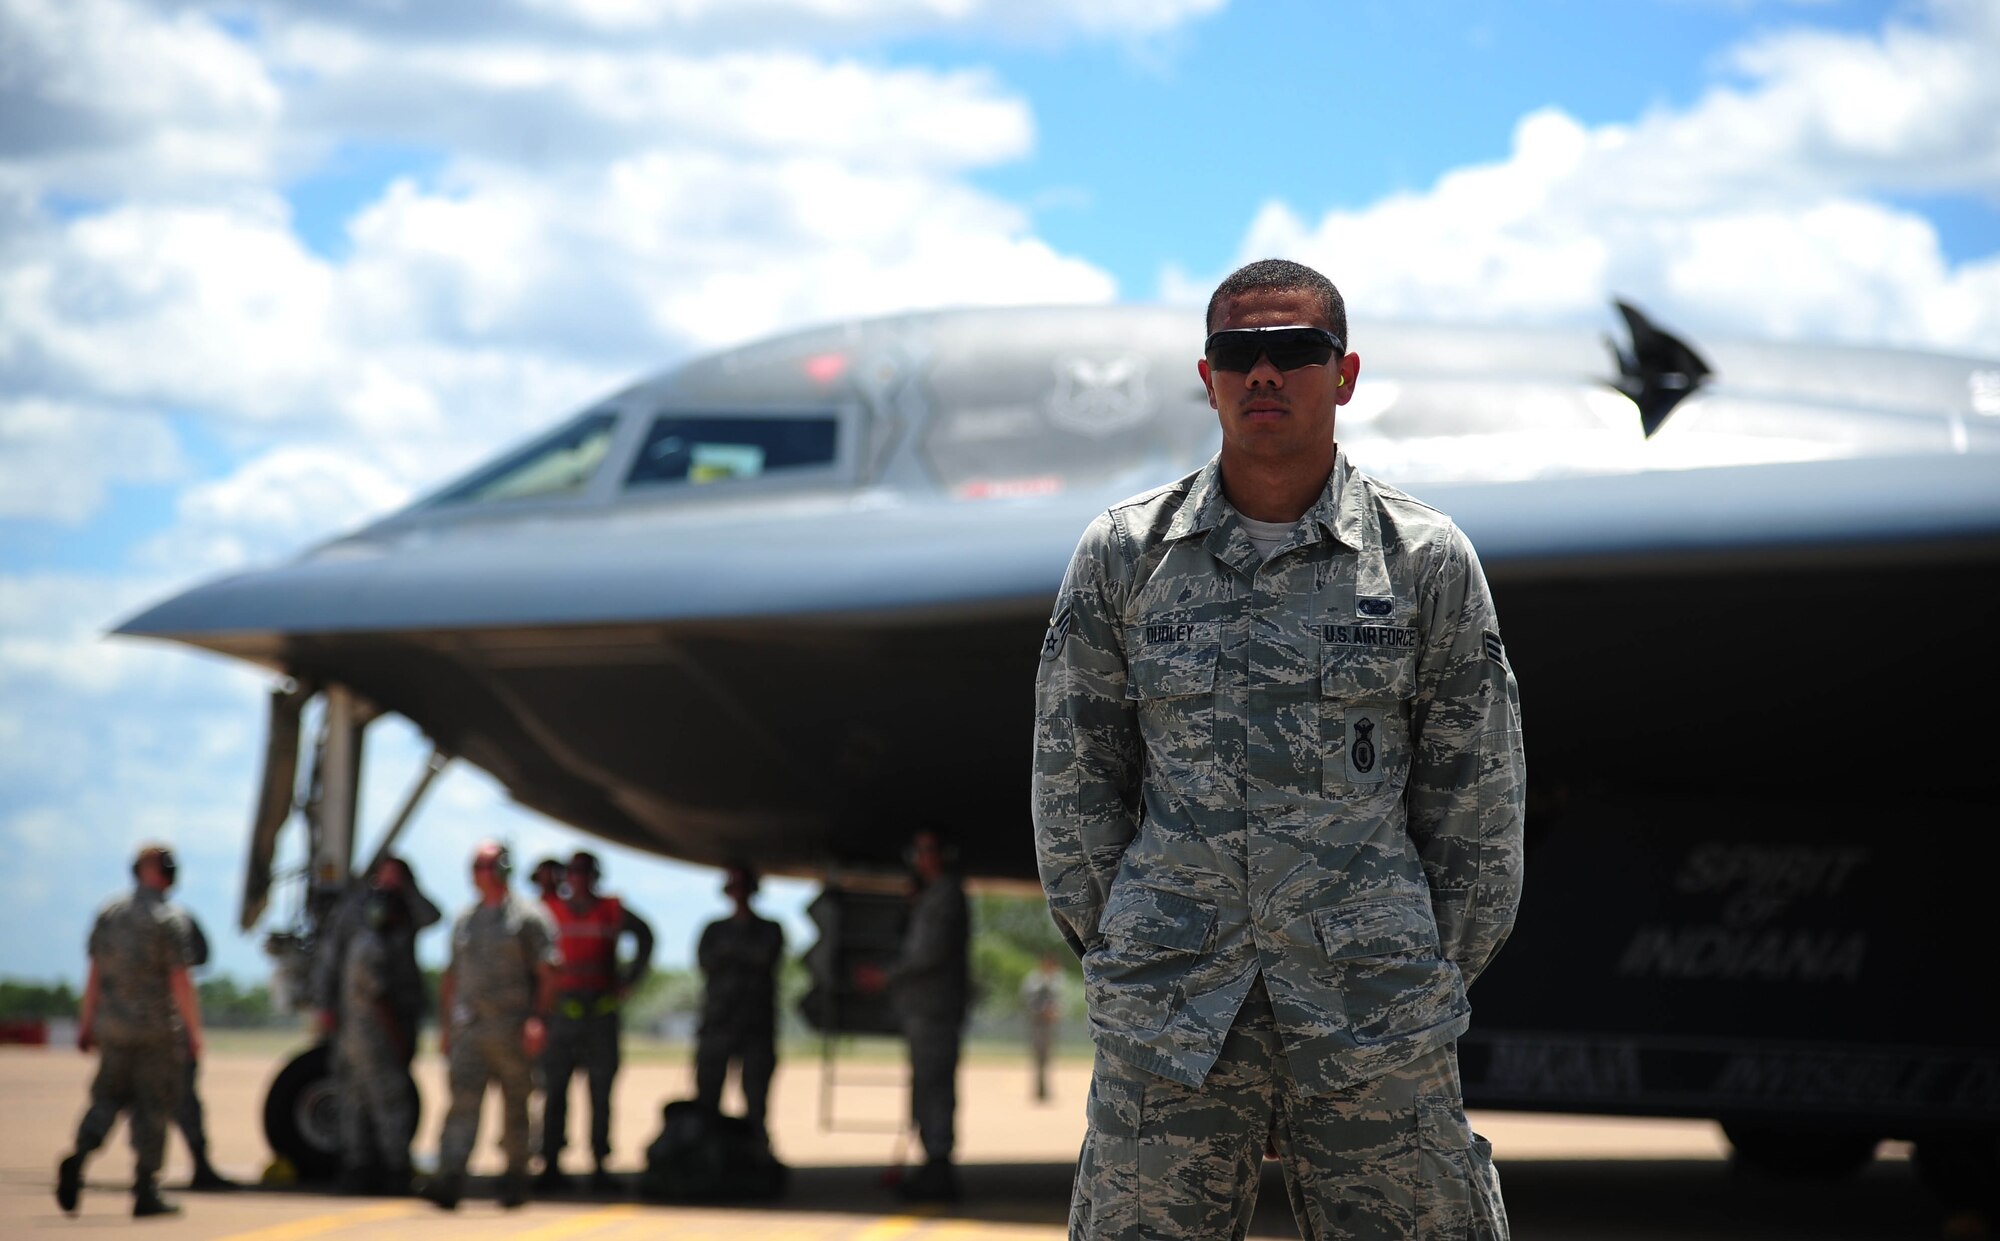 U.S. Air Force Senior Airman Tyler Dudley, a security forces response member with the 509th Security Forces Squadron, guards a U.S. Air Force B-2 Spirit bomber at Royal Australian Air Force Base Tindal, Australia, March 22, 2016, while aircrews conduct an engine running crew change. The B-2 was one of three that were deployed to the Indo-Asia-Pacific region from March 8 through 29 to enhance bomber crew readiness and proficiency and to integrate capabilities with key regional partners. U.S. Strategic Command bombers regularly rotate through the Indo-Asia-Pacific region to conduct theater security cooperation engagements with U.S. allies and partners and demonstrate a shared commitment to promoting security and stability in the region. (U.S. Air Force photo by Senior Airman Joel Pfiester/ Released)